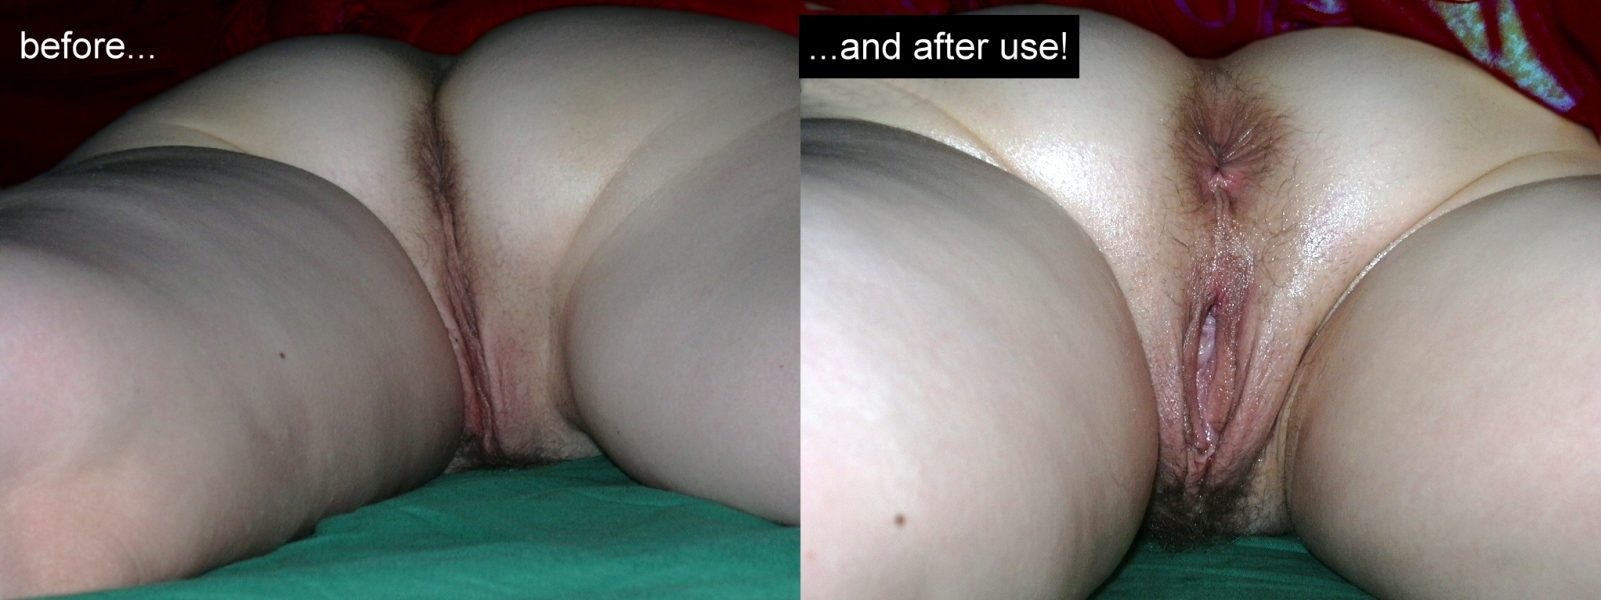 Before and after the use... - On Yuvutu Homemade Amateur Porn Movies And  XXX Sex Videos